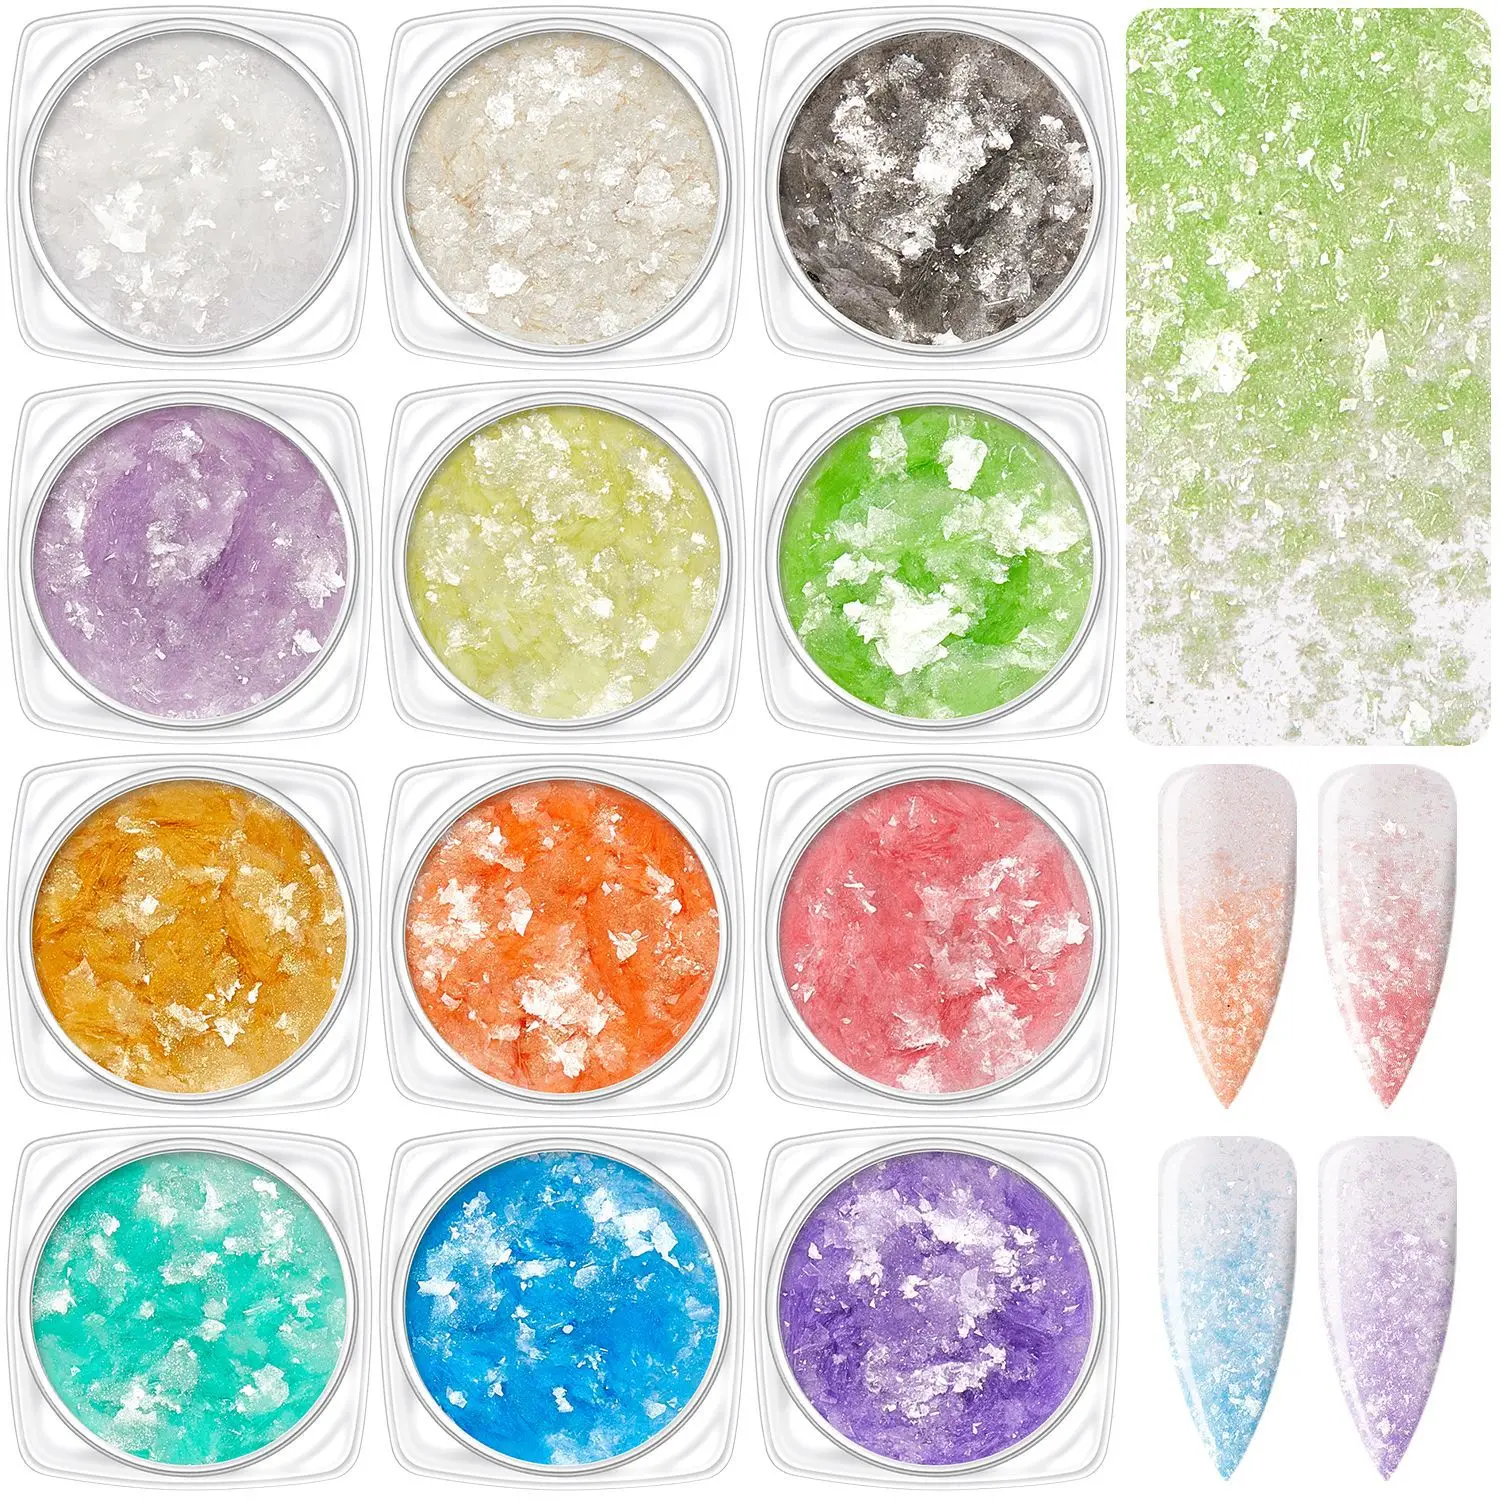 Nail Art Glitter Nail Chips Fancy Aurora Crystal Chips Holographic Sequins Charming White Sheet 3D Decorations 1 Jar